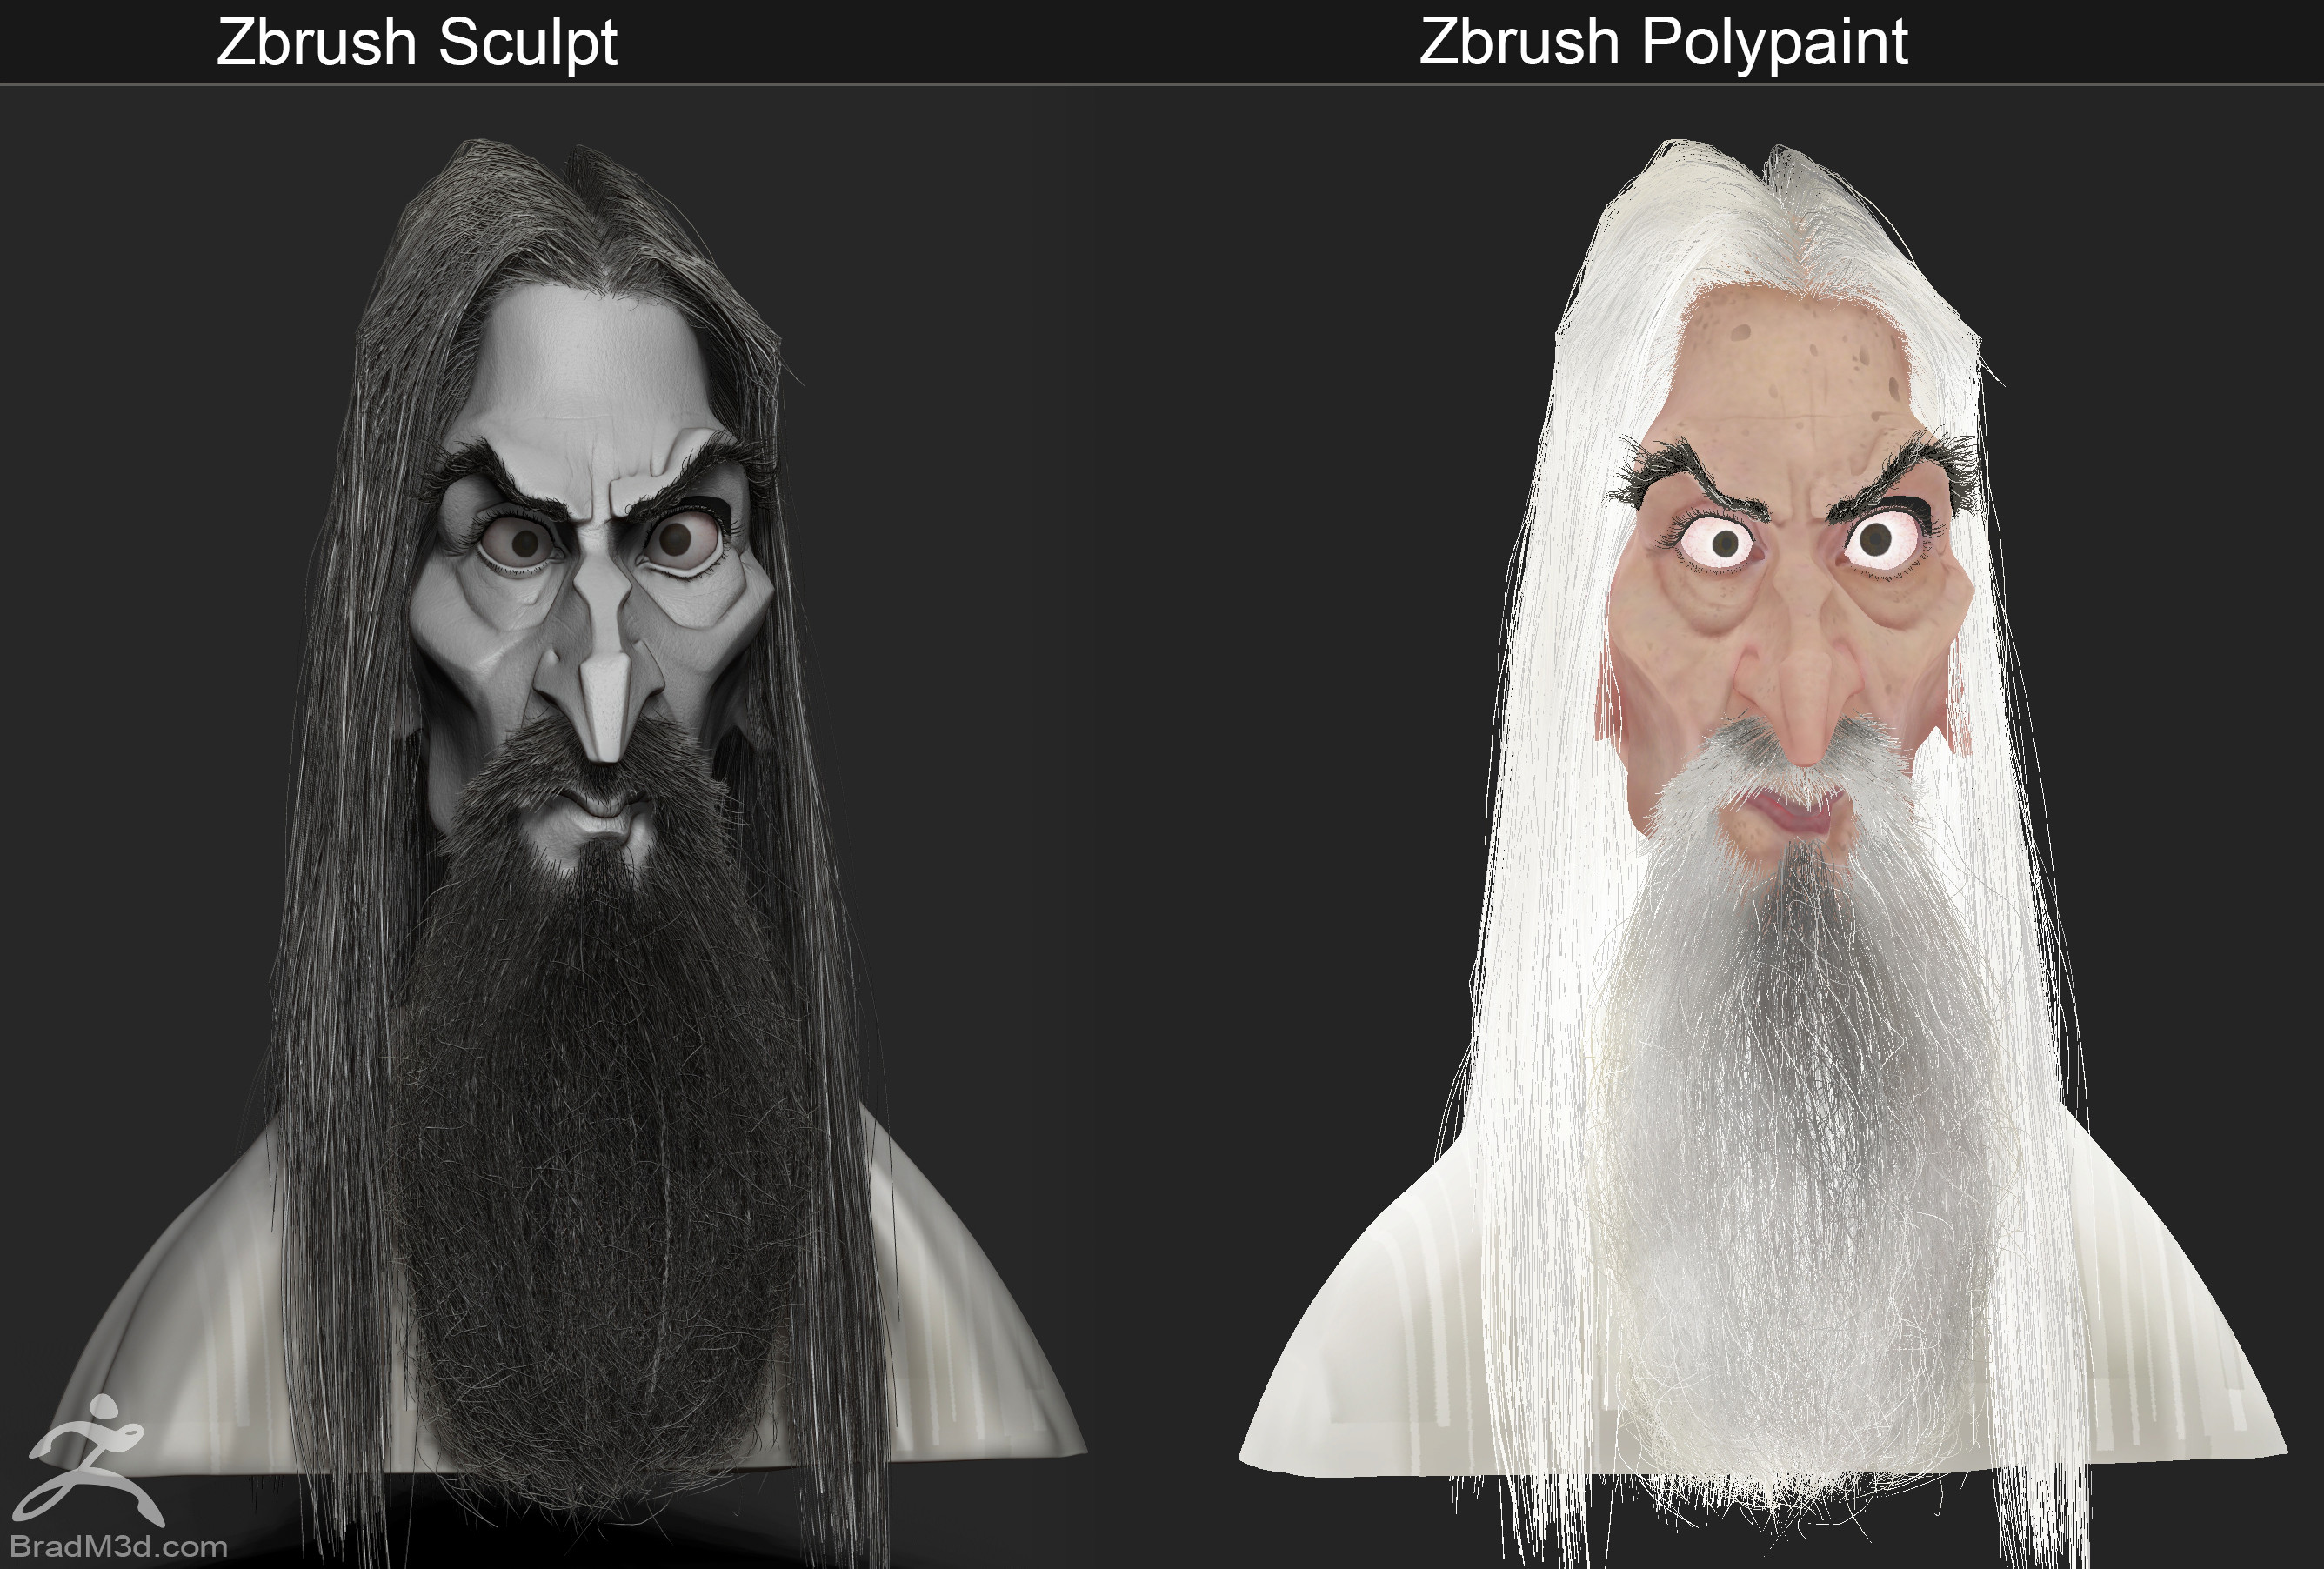 Simple Zbrush Sculpt BPR Render and Flat Shaded polypaint demo